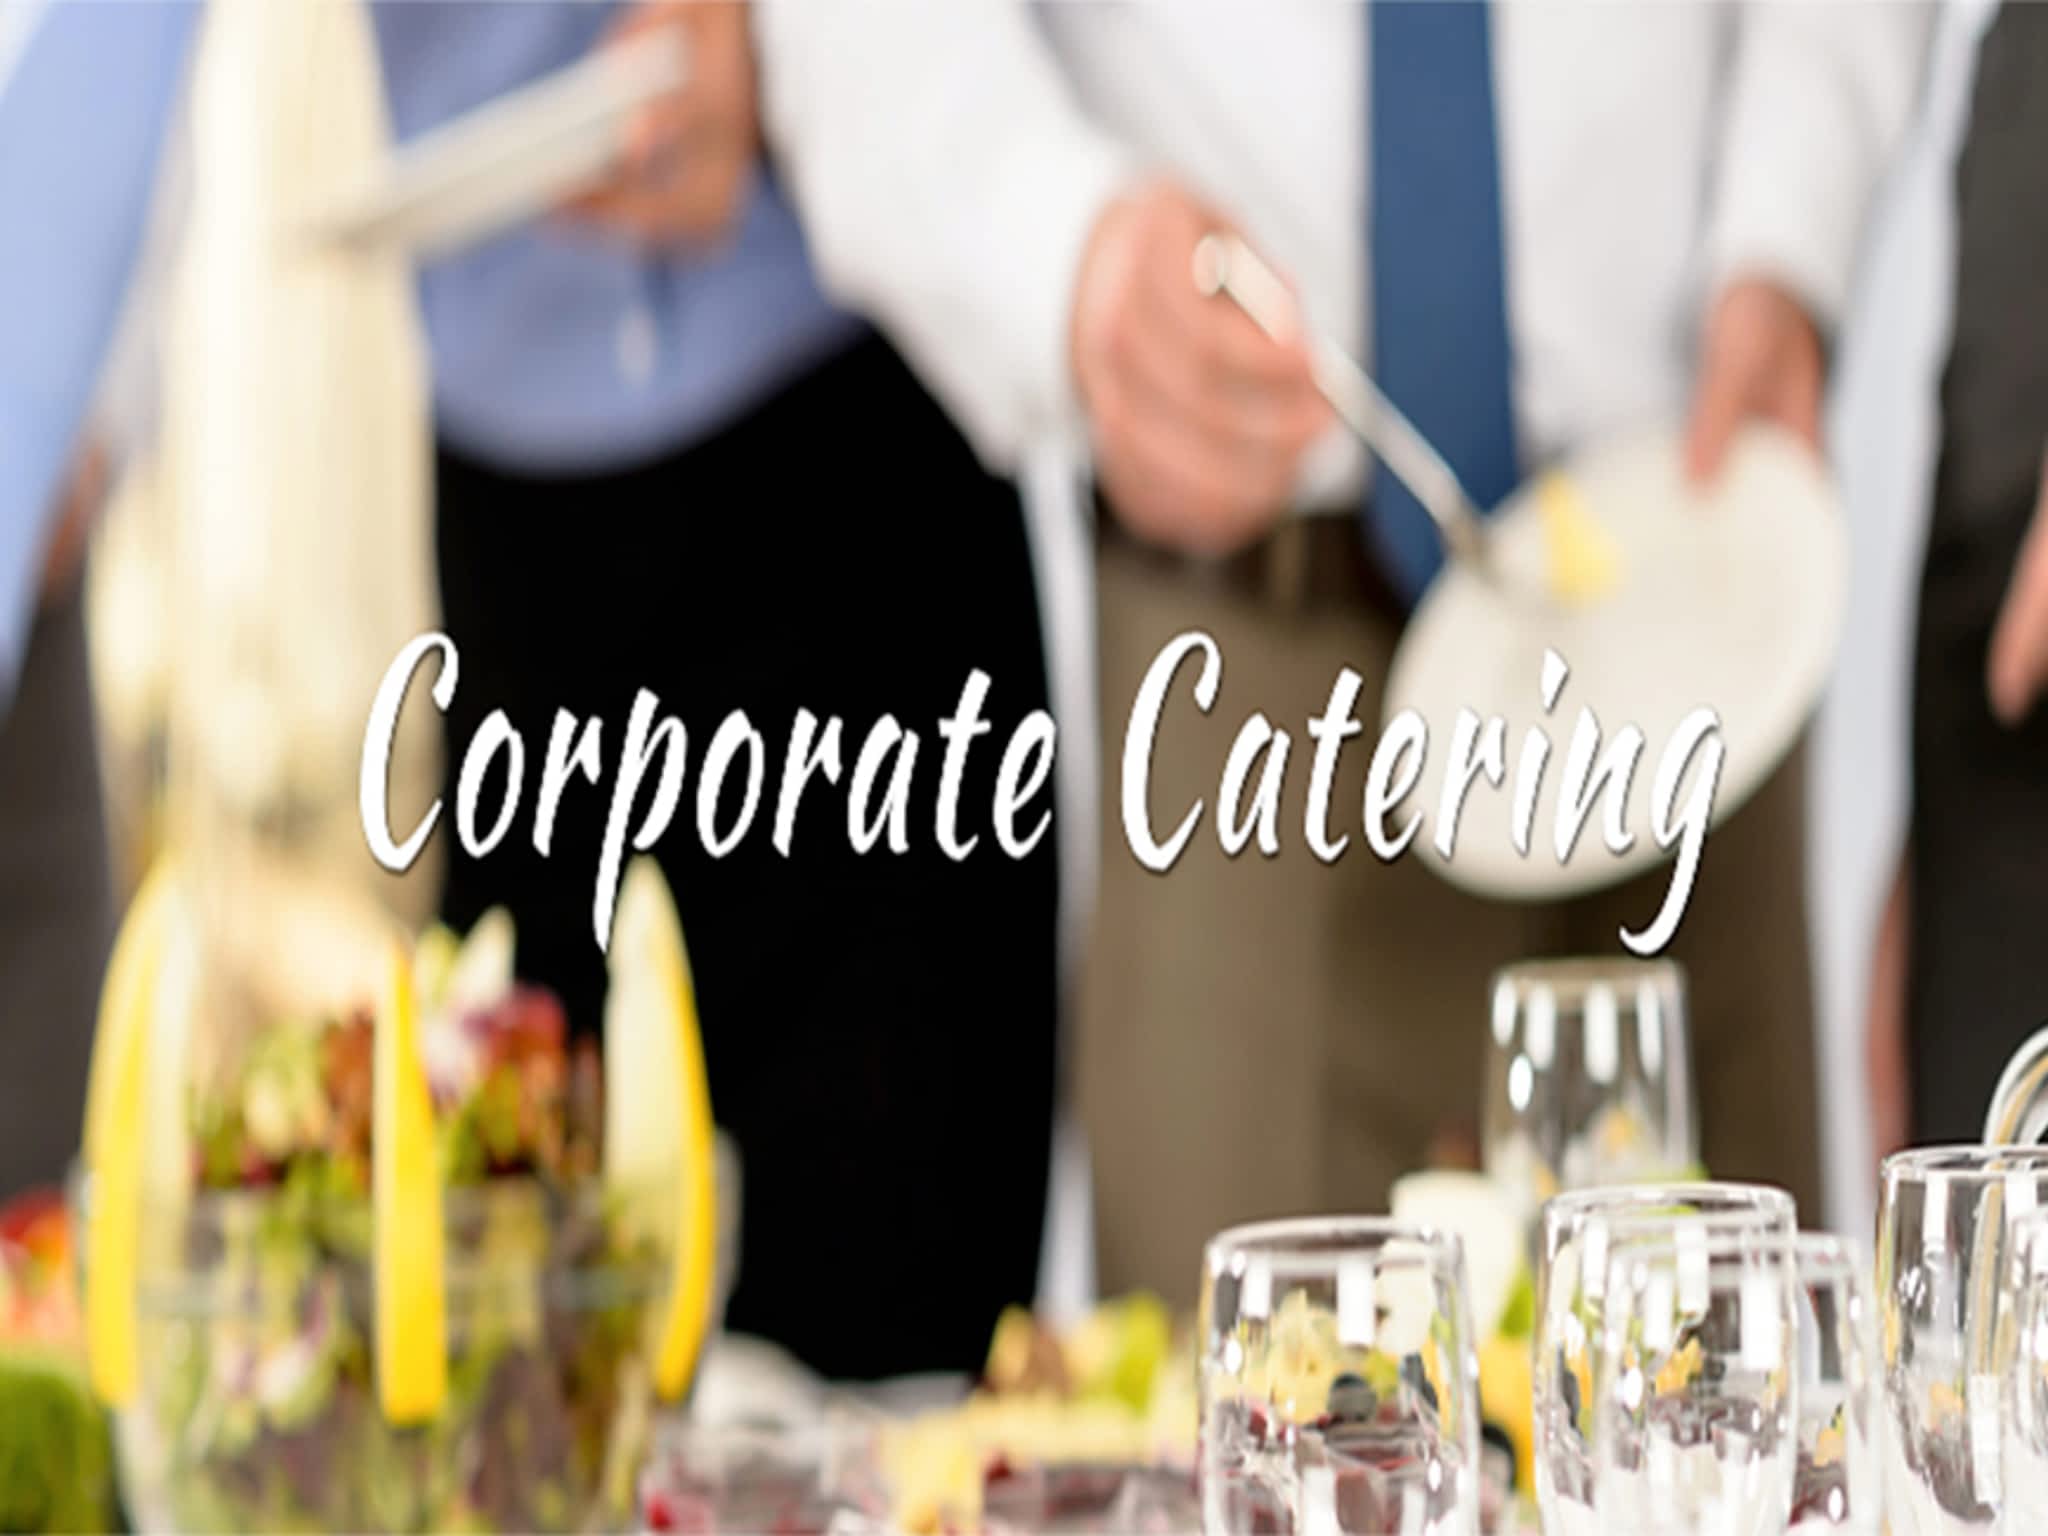 photo Mikcoa Catering